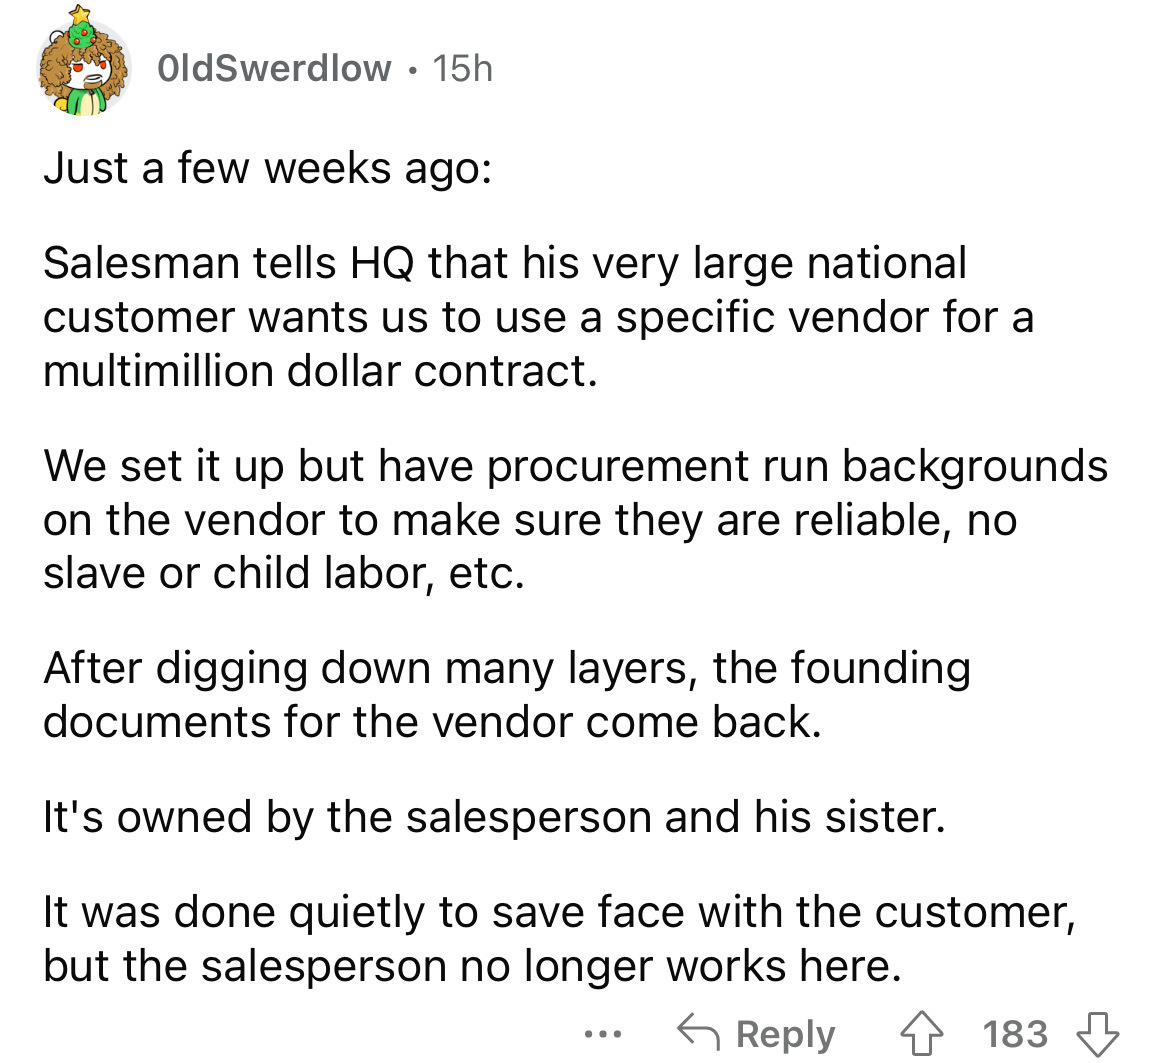 number - OldSwerdlow 15h Just a few weeks ago Salesman tells Hq that his very large national customer wants us to use a specific vendor for a multimillion dollar contract. We set it up but have procurement run backgrounds on the vendor to make sure they a